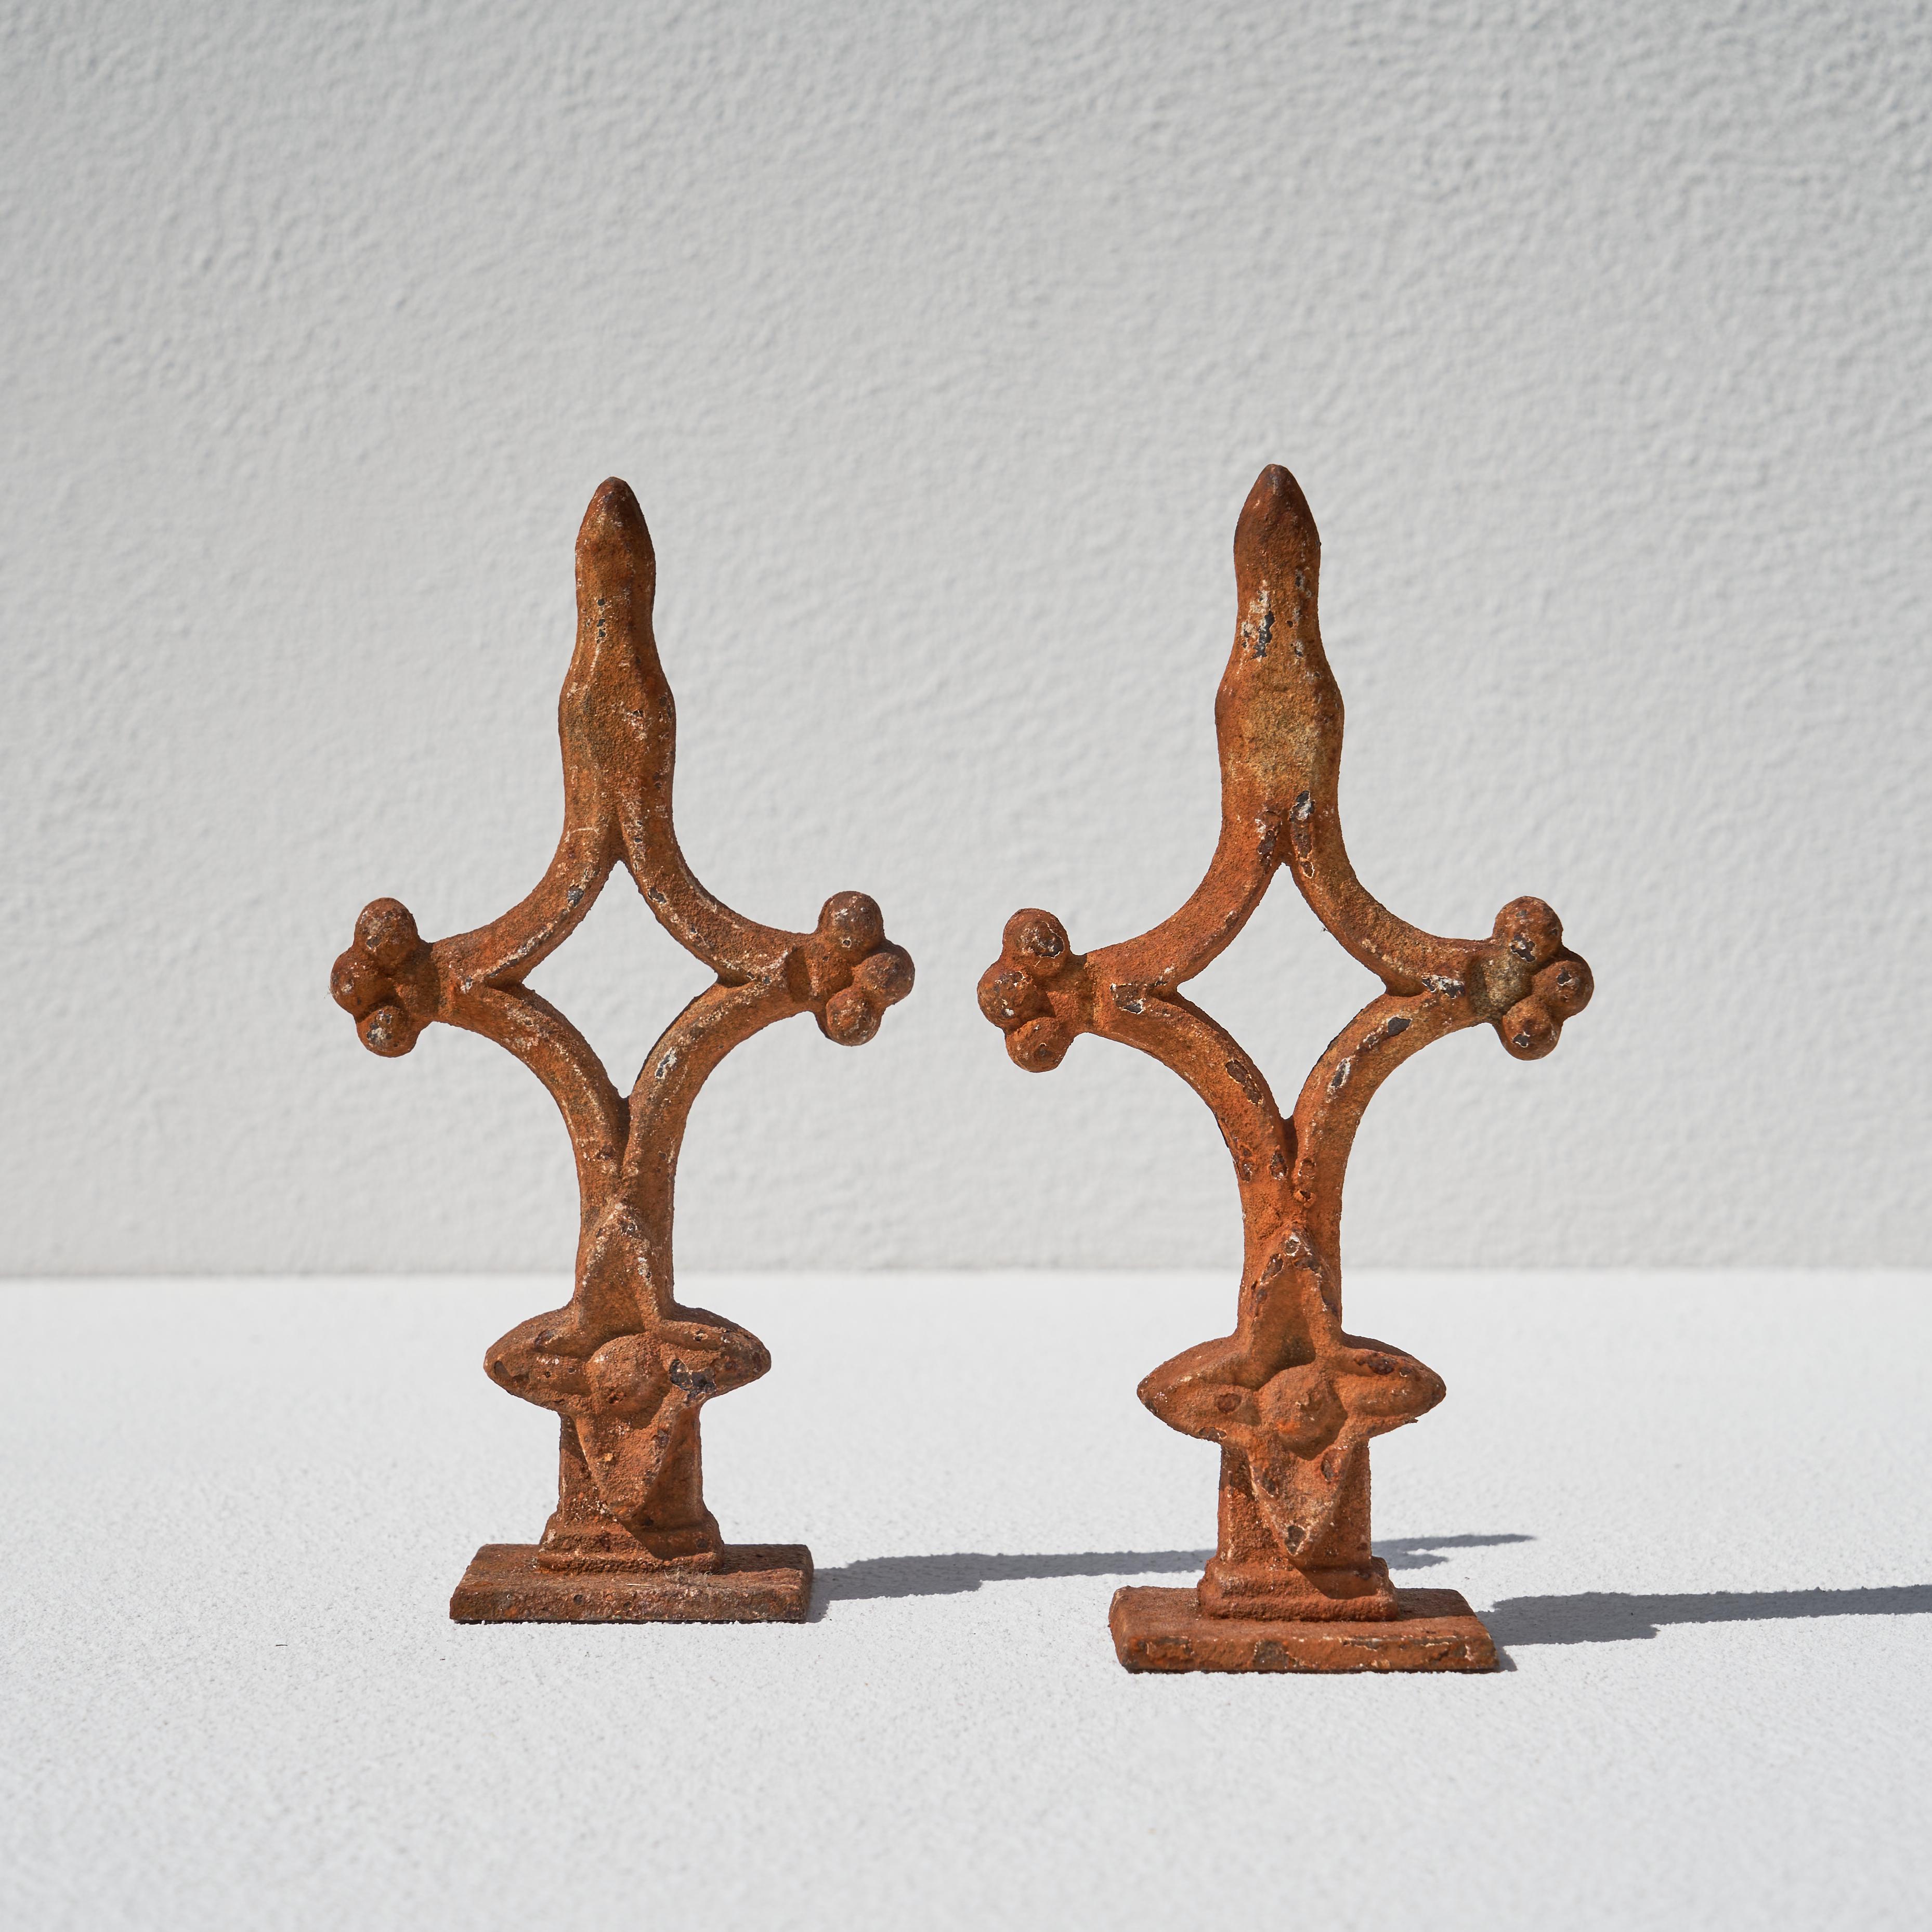 Unknown Set of 4 Rusted 19th Century Decorative Finials For Sale